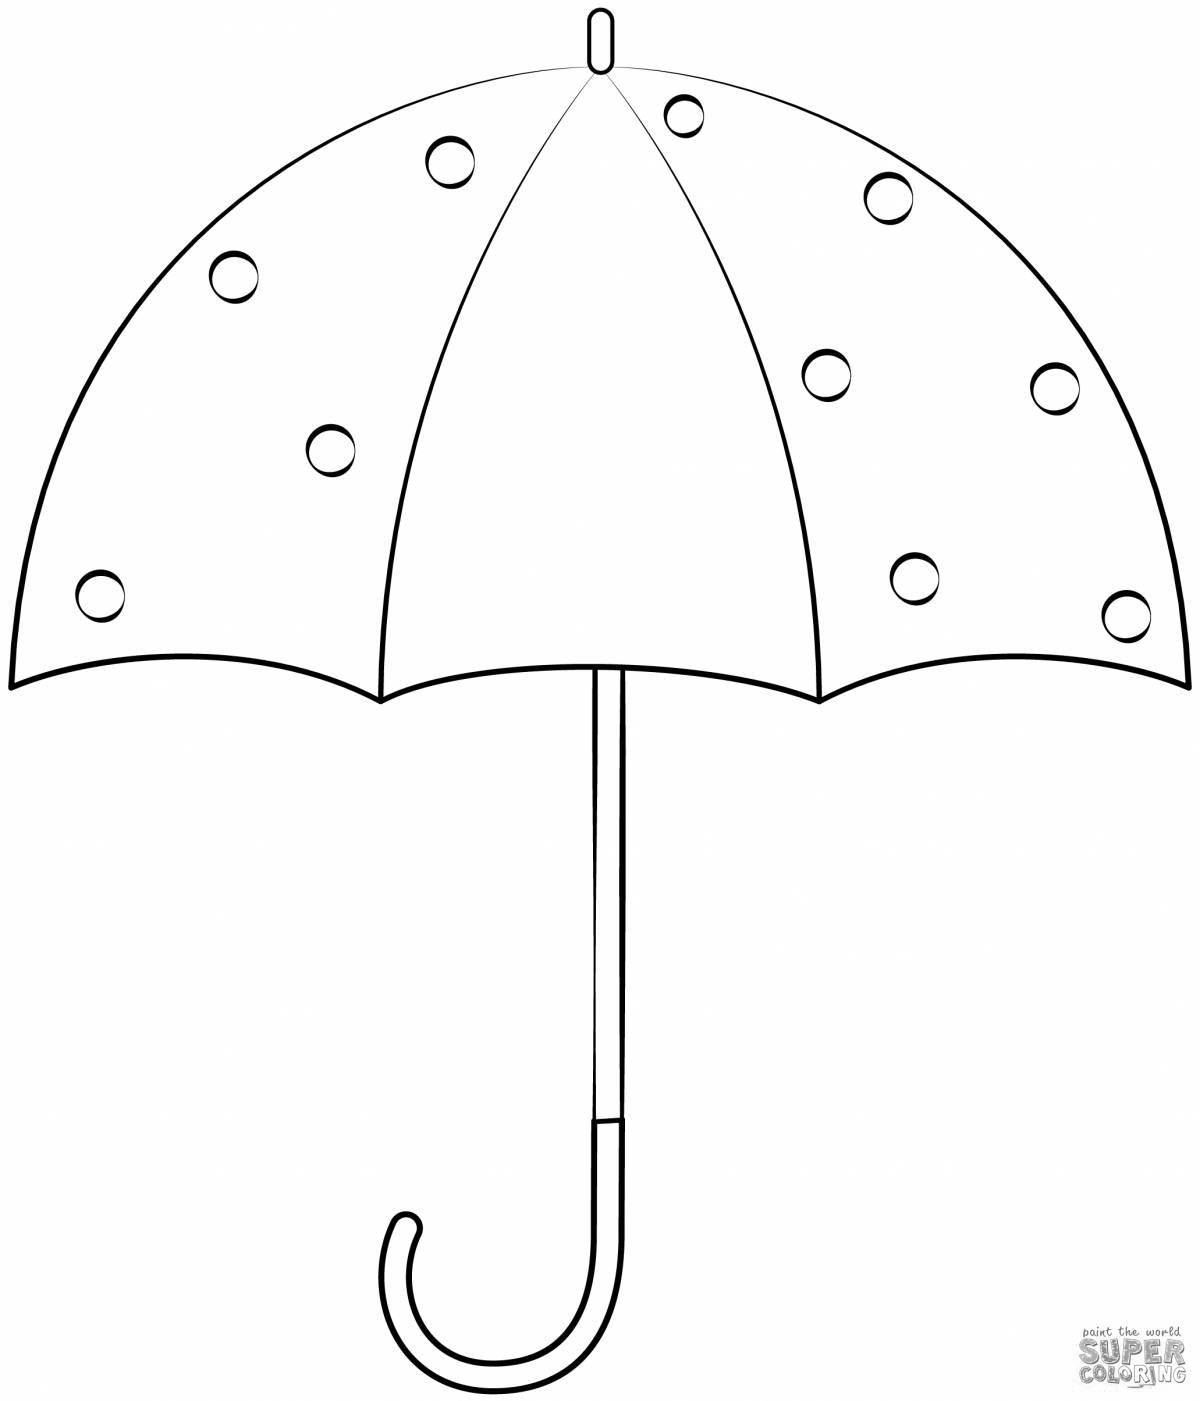 Coloring book funny umbrella for children 4-5 years old